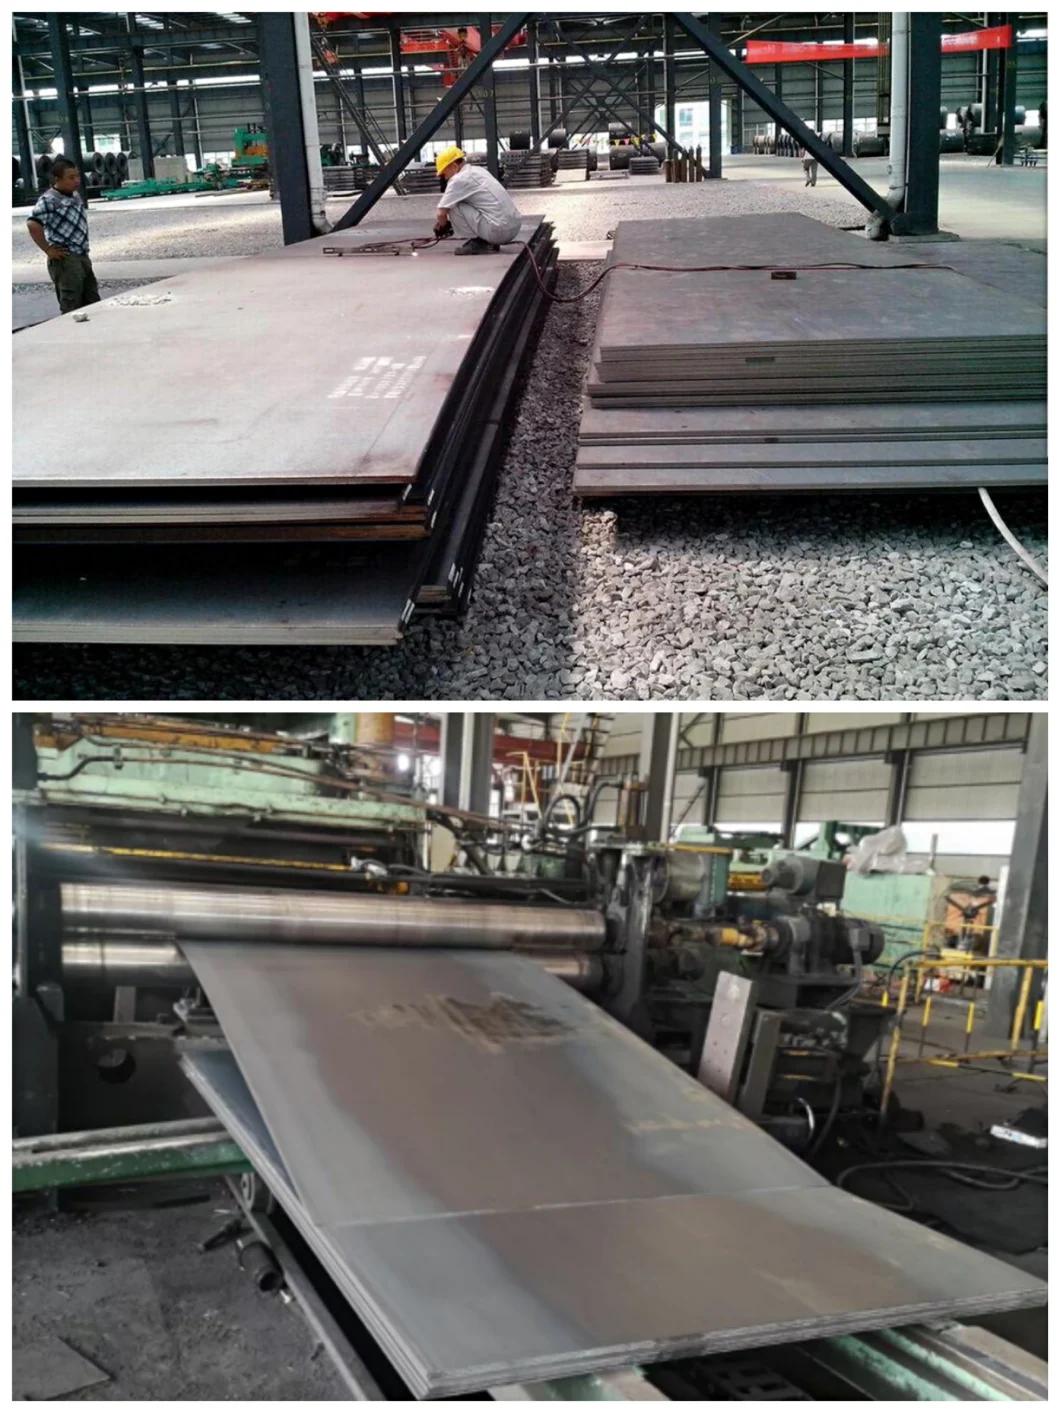 Carbon Steel Sheet Q345 6mm 10mm 12mm High Quality Hot Rolled Steel Plate S235 S275 Q235 with Abundant Stock